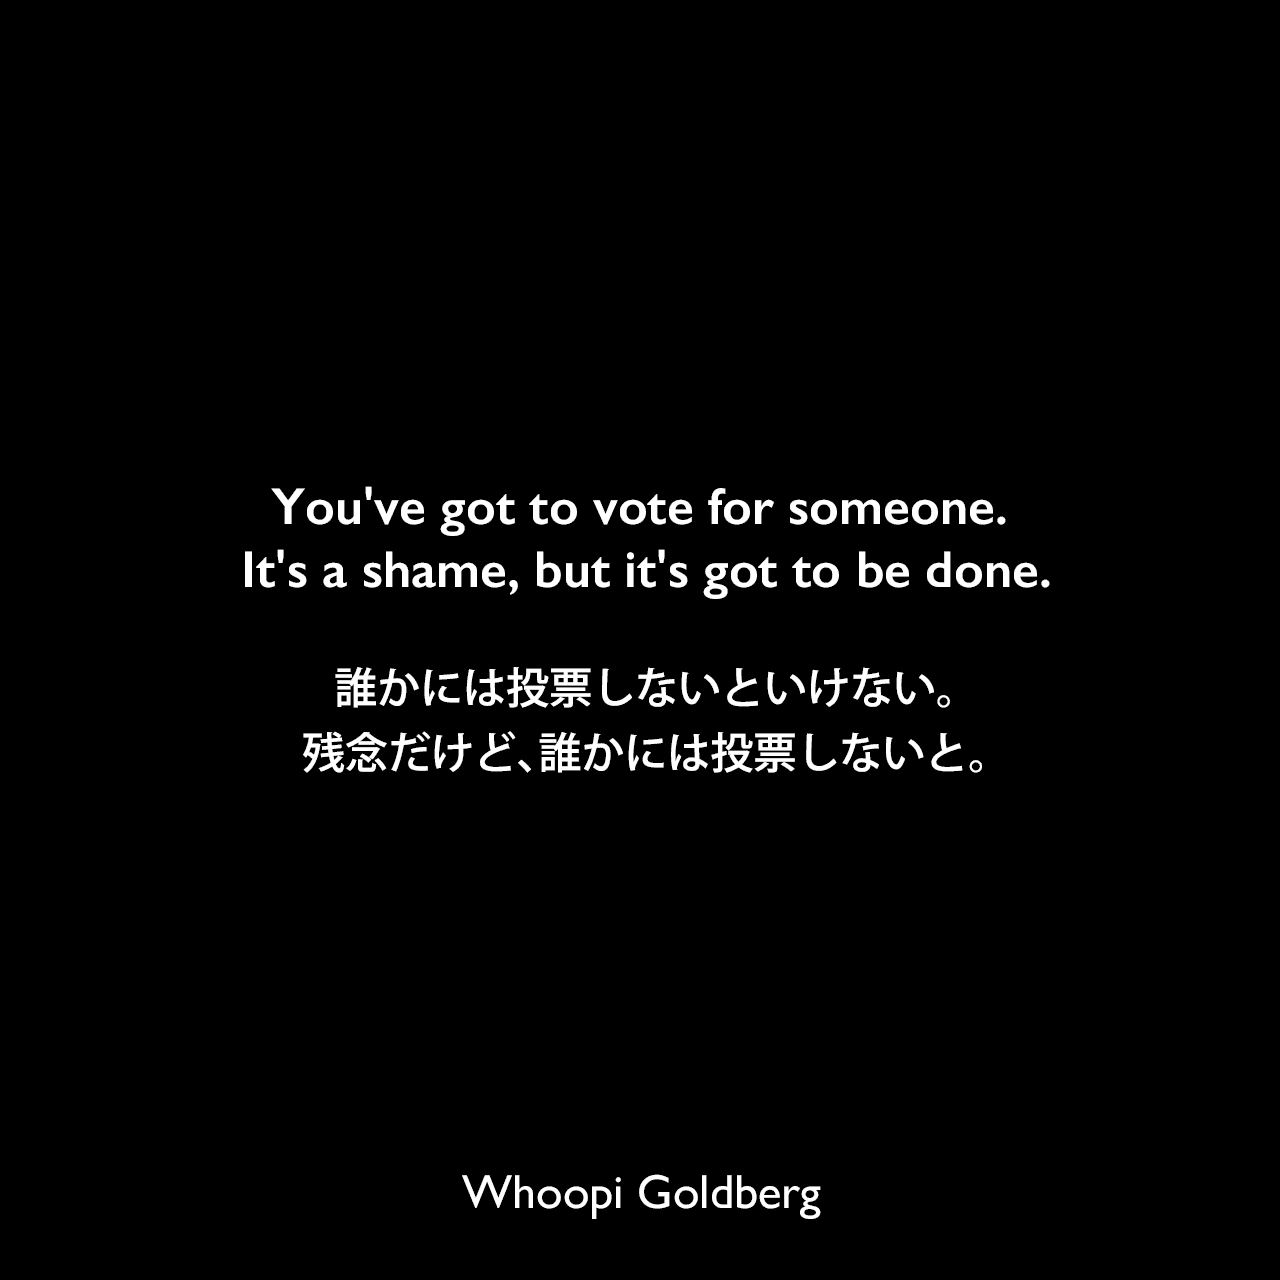 You've got to vote for someone. It's a shame, but it's got to be done.誰かには投票しないといけない。残念だけど、誰かには投票しないと。Whoopi Goldberg